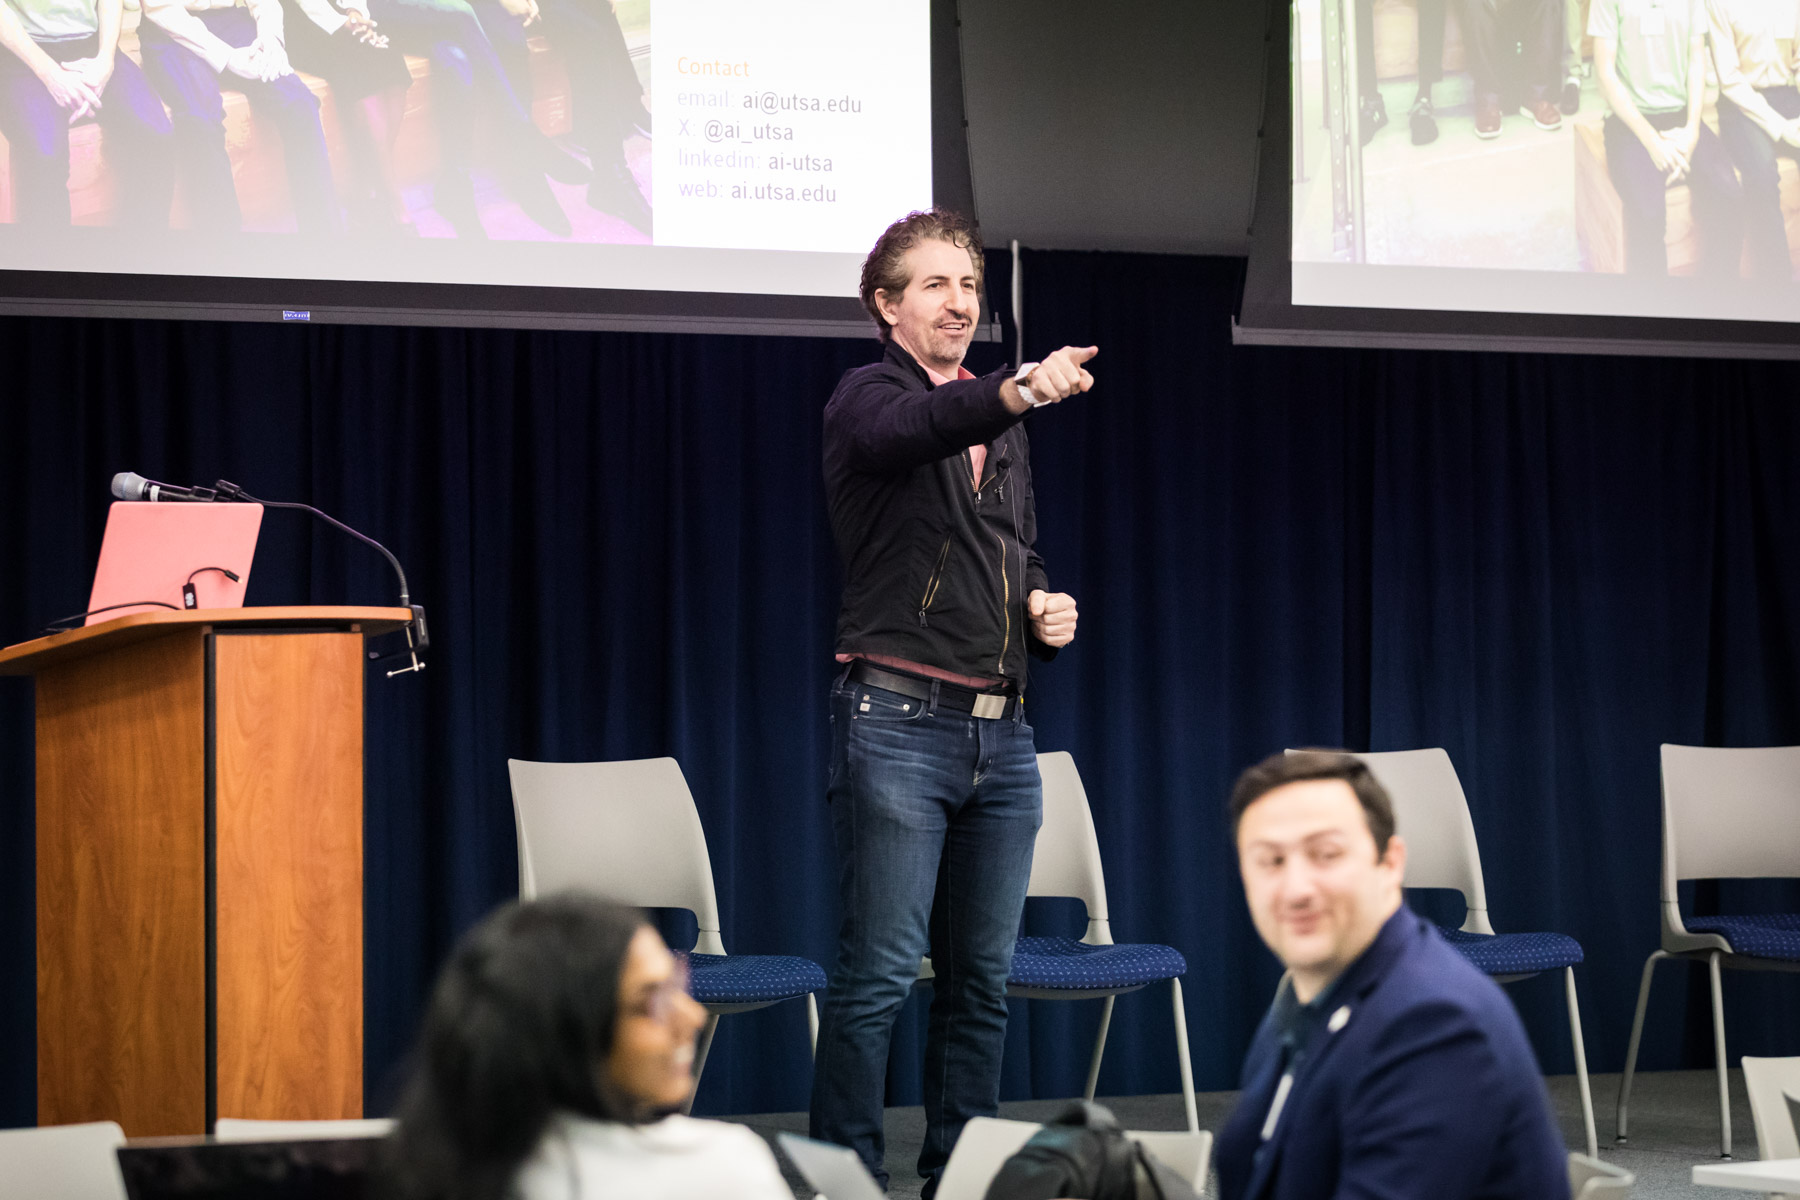 Male speaker on stage pointing to audience during a UTSA conference for an article on corporate event photo tips